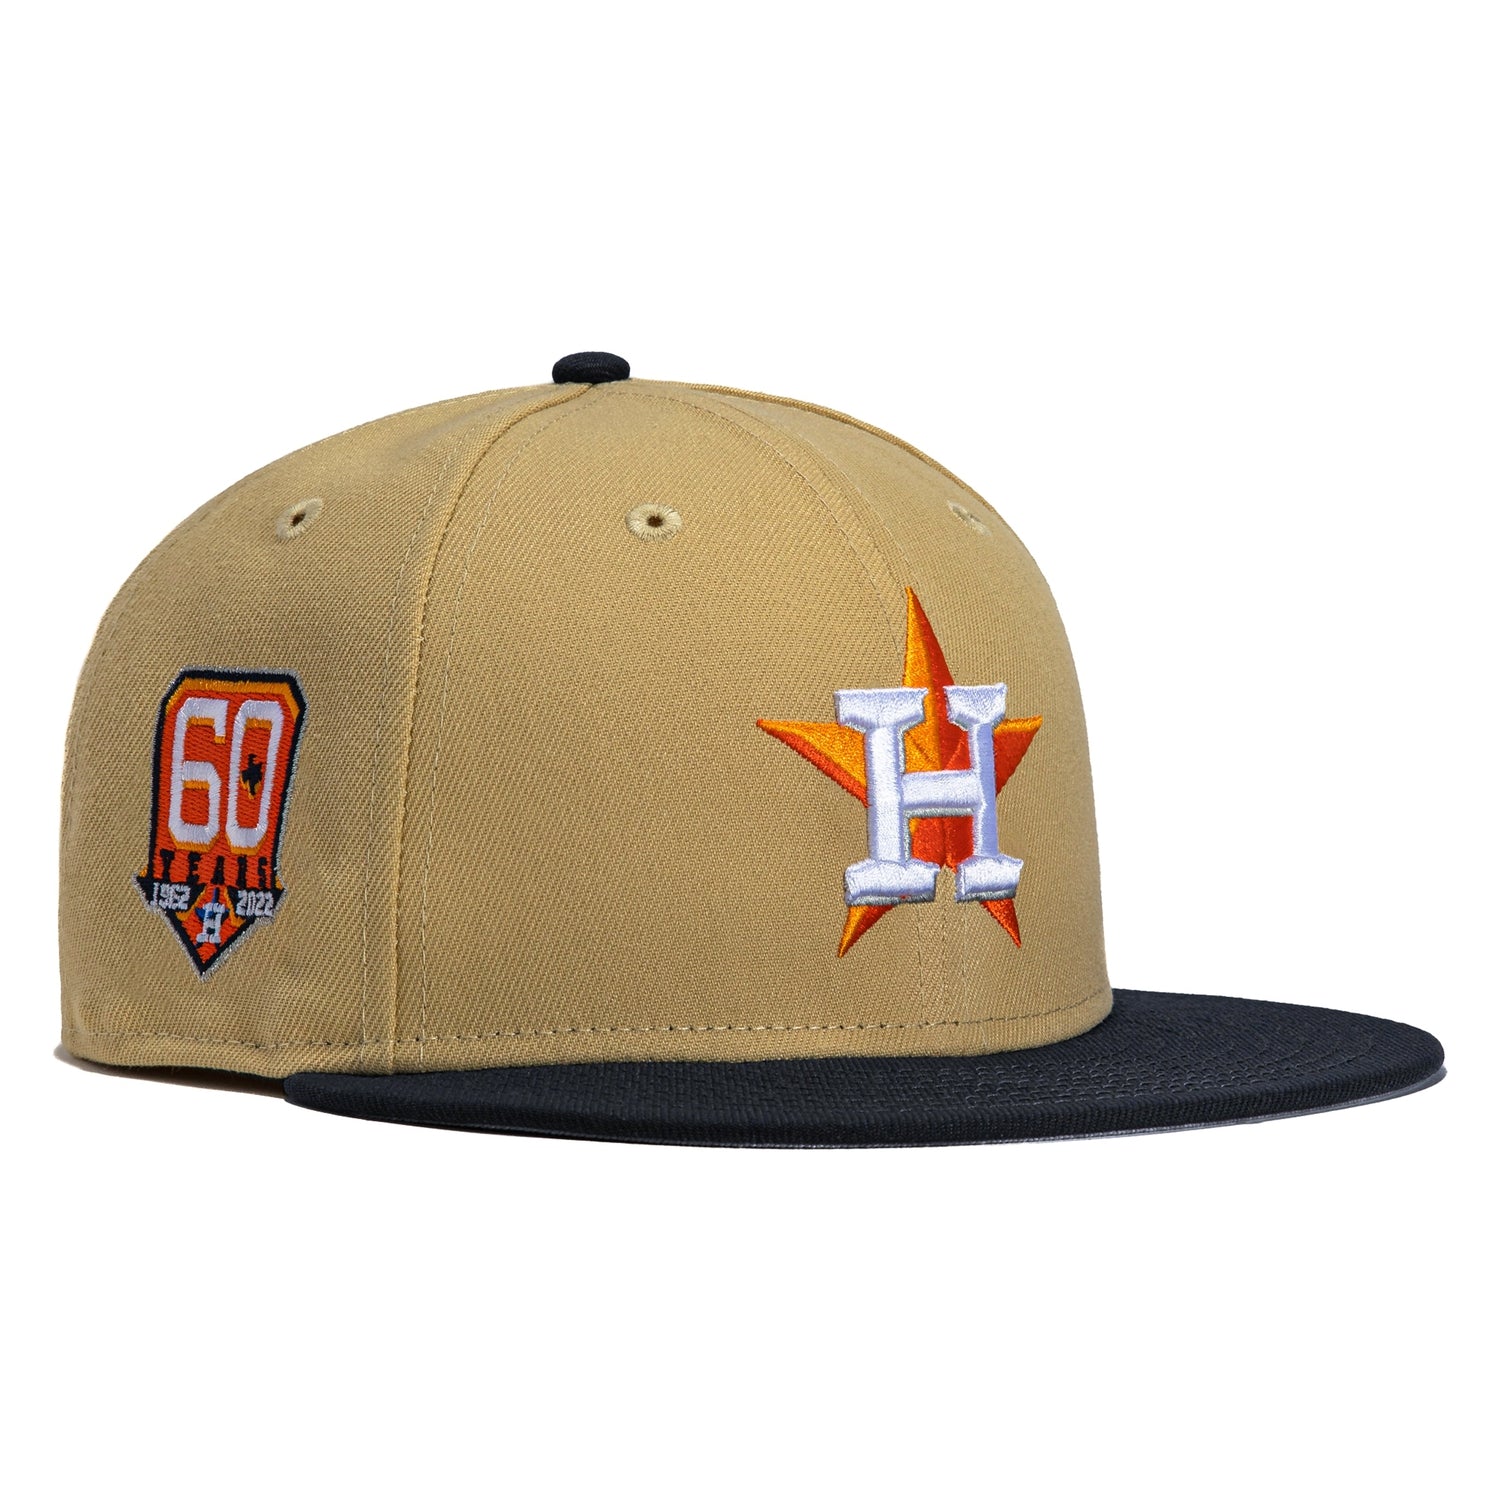 Houston Astros-60 Wide-Fabric Traditions-BTY